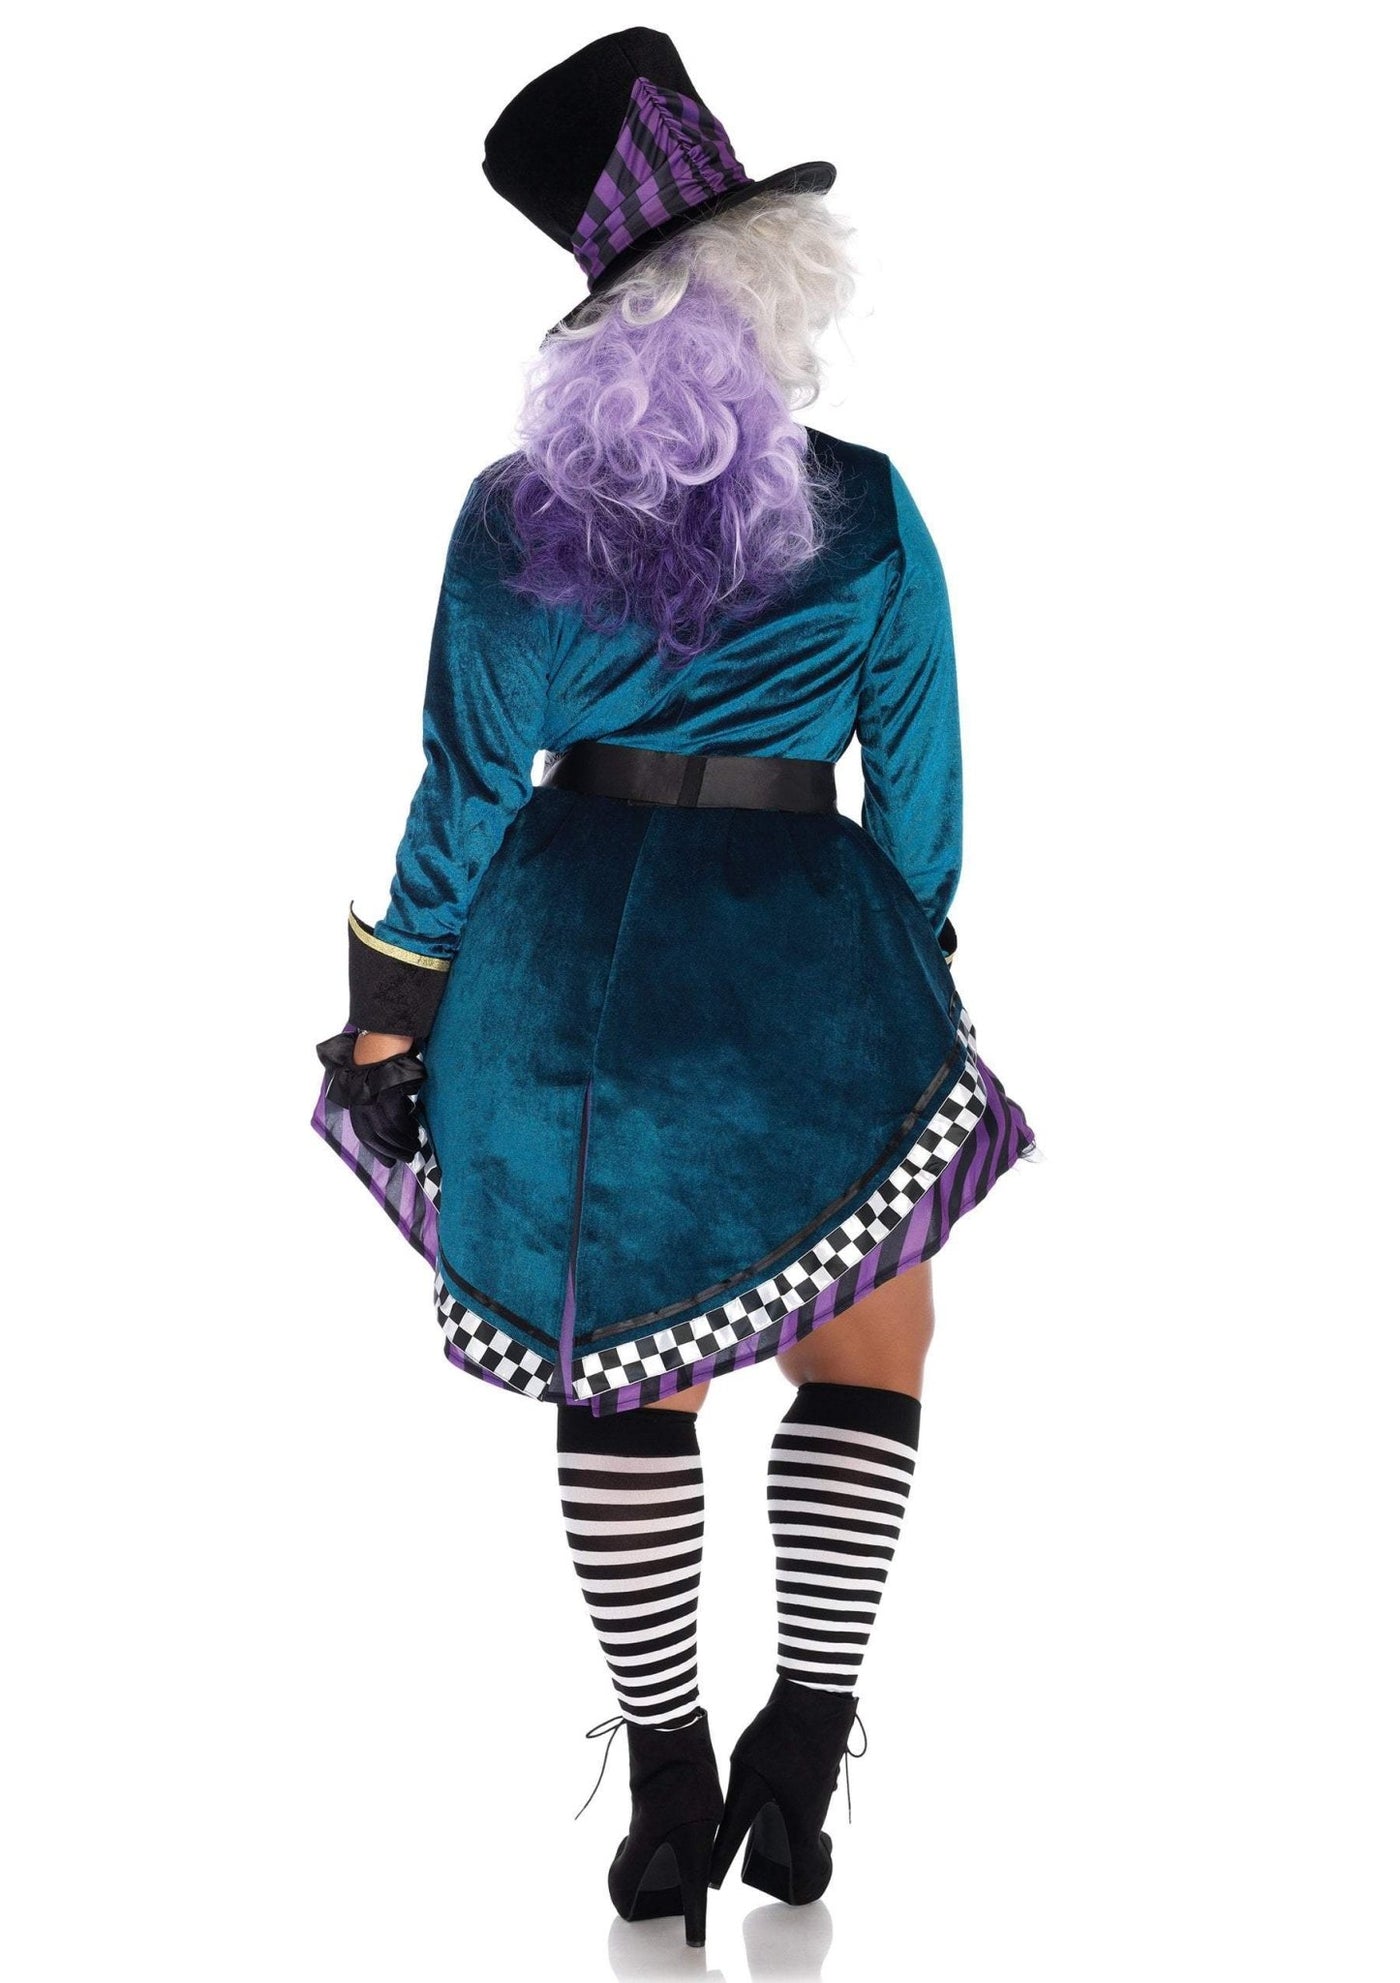 Womens Plus Size Delightful Mad Hatter Costume - JJ's Party House